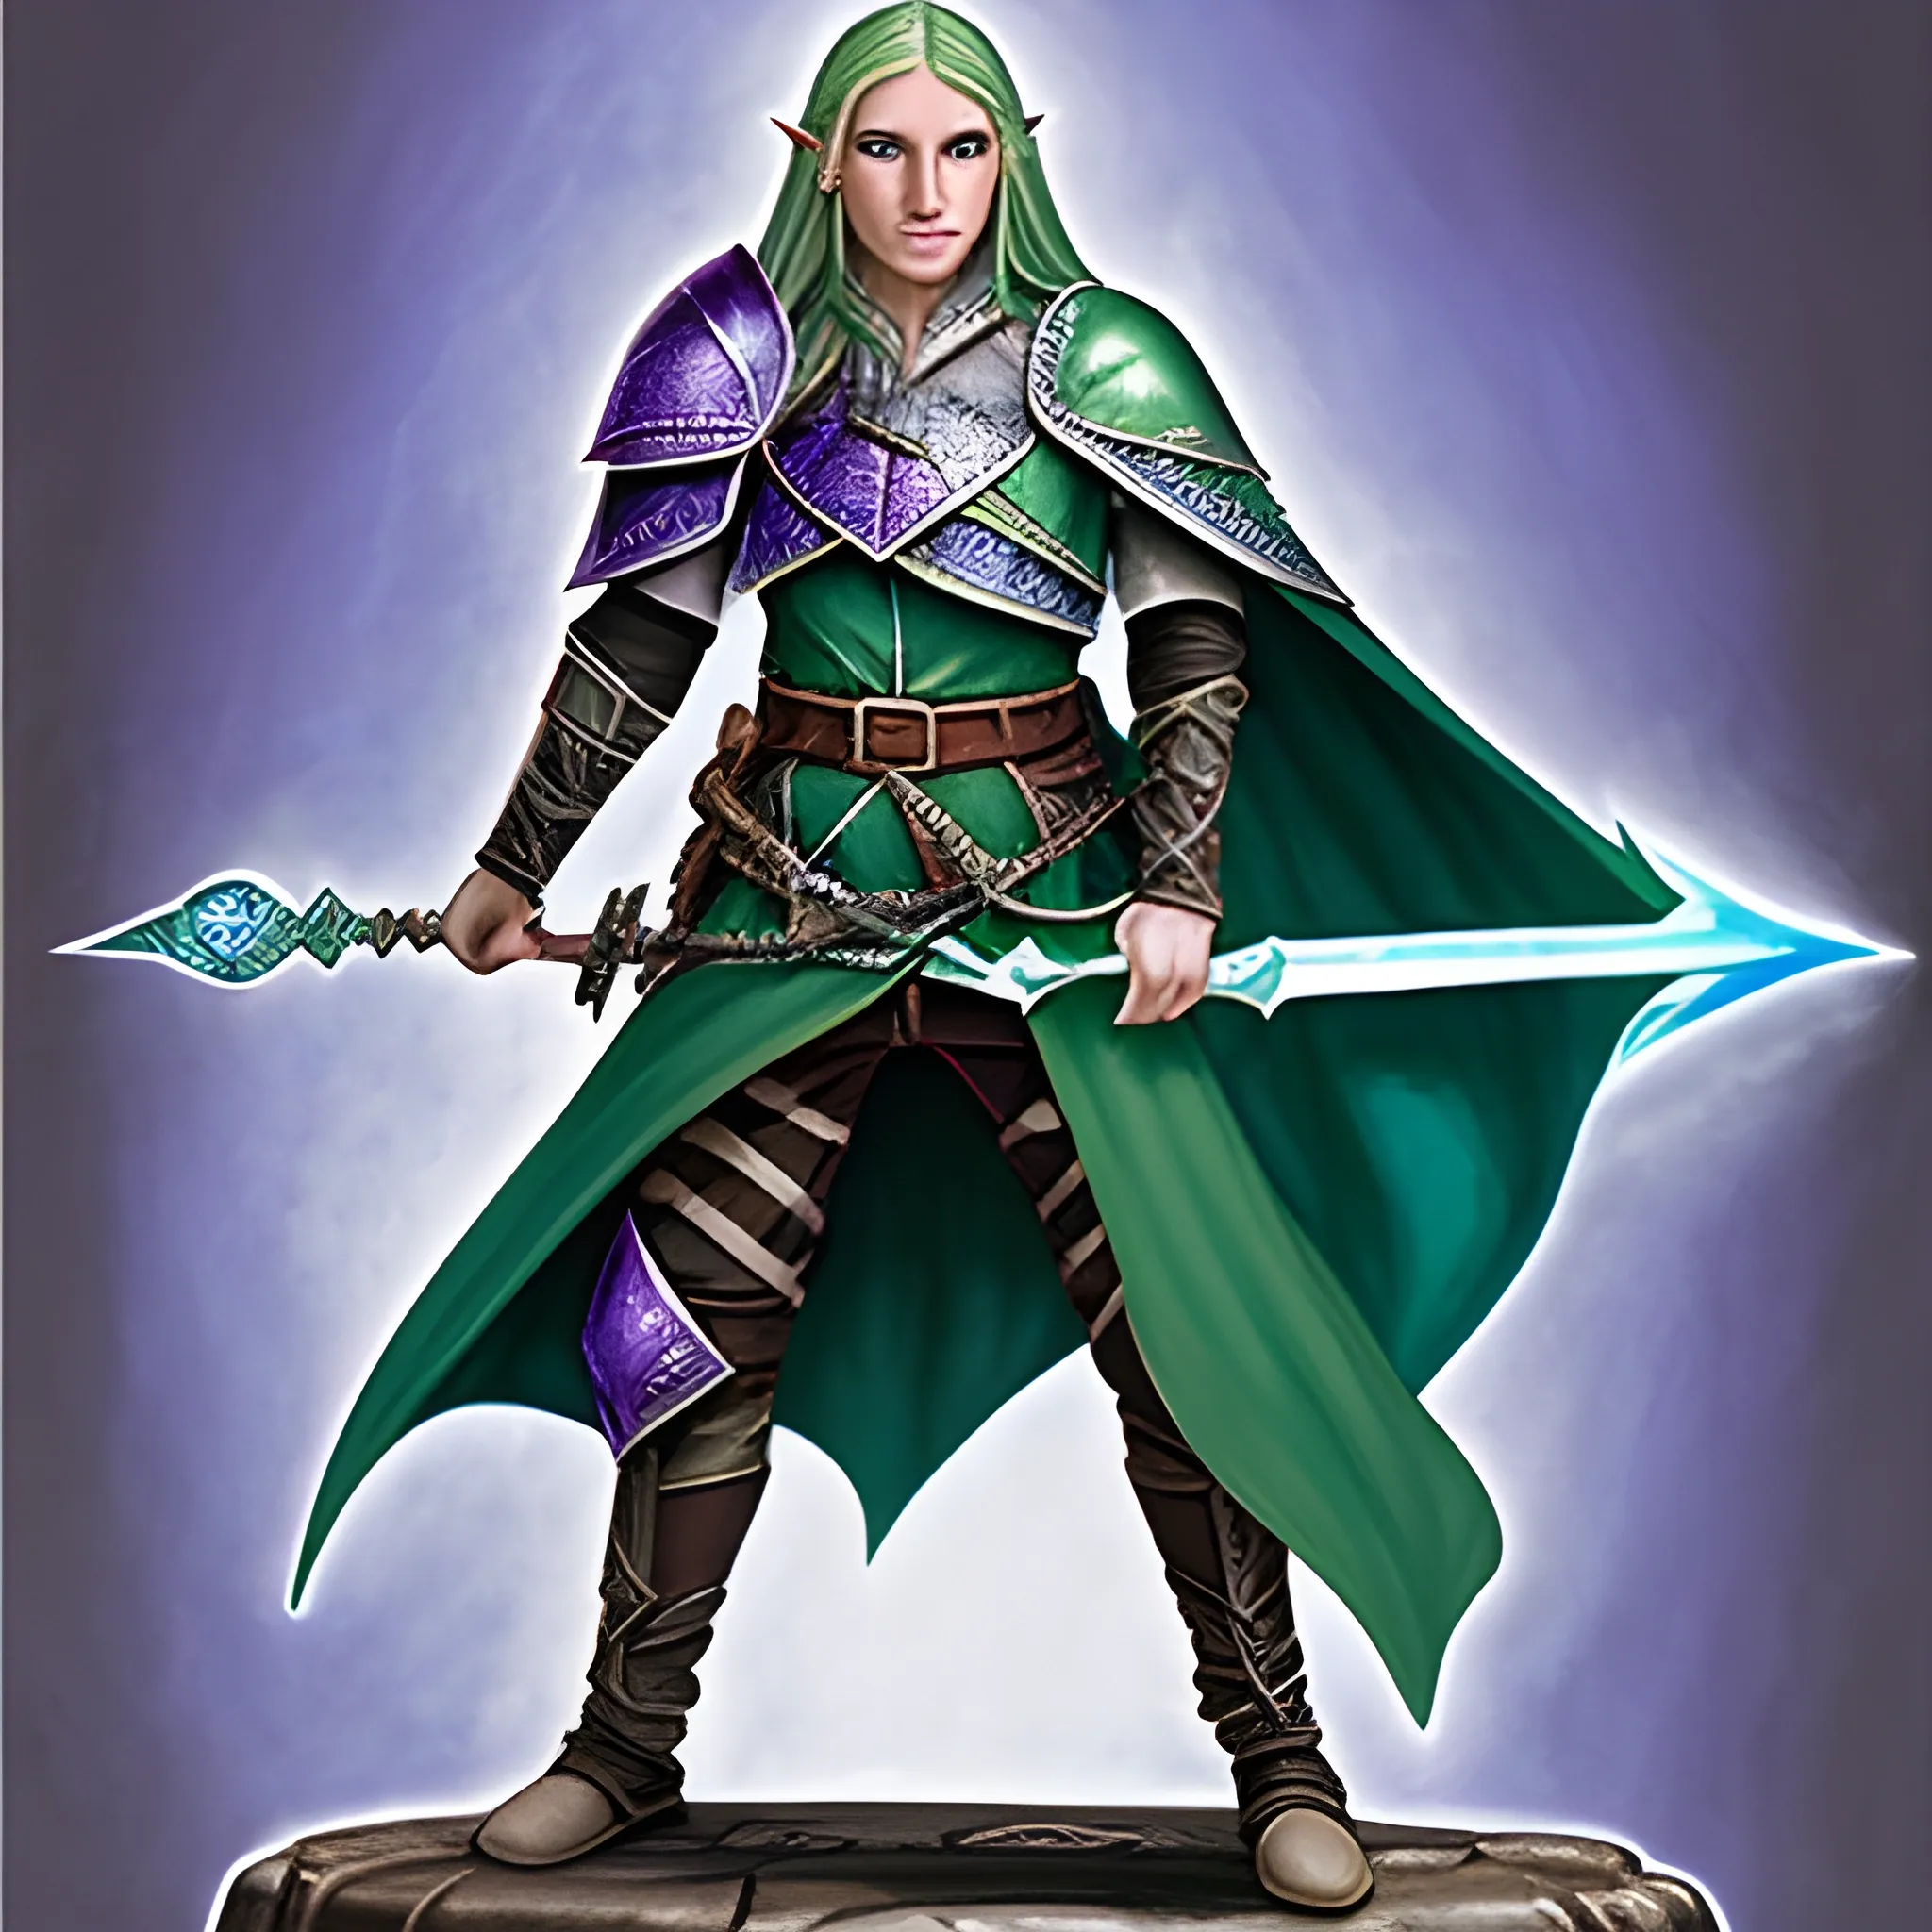 Create a dungeons and dragons character which is an Eladrin Elf male Twilight Cleric of Selune with green long hair and piercing blue eyes, wearing scale mail armor, a rapier, and a shield, Oil Painting, Water Color